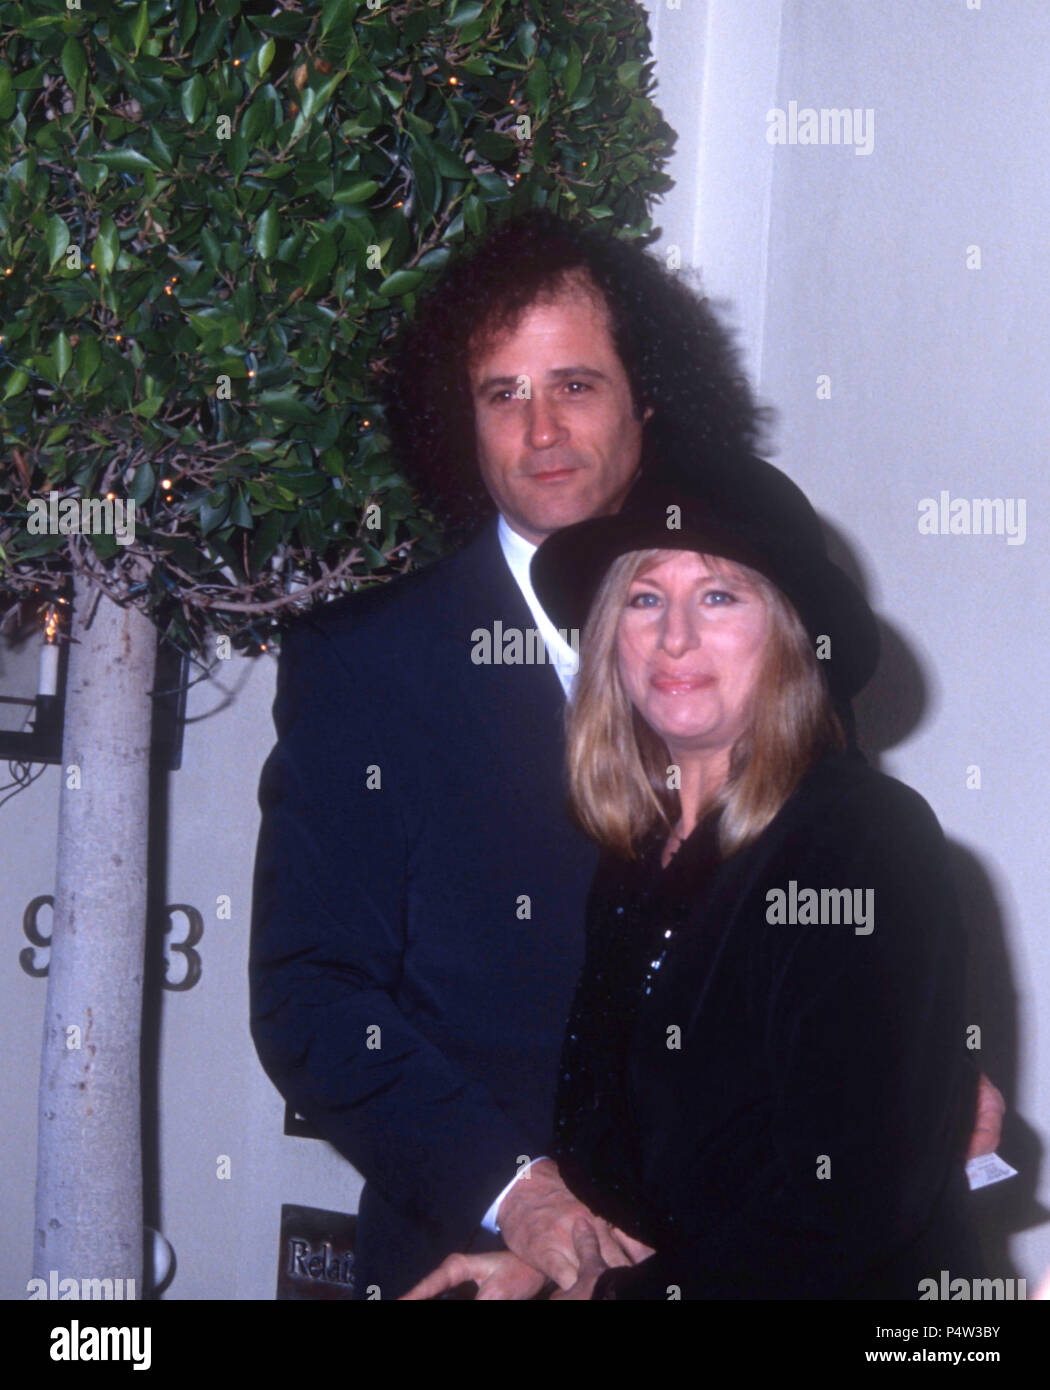 WEST HOLLYWOOD, CA - JANUARY 10: (L-R) Composer Richard Baskin and singer Barbra Streisand attend the Wedding Reception for Jane Fonda and Ted Turner on January 10, 1992 at L'Orangerie Restaurant in West Hollywood, California. Photo by Barry King/Alamy Stock Photo Stock Photo